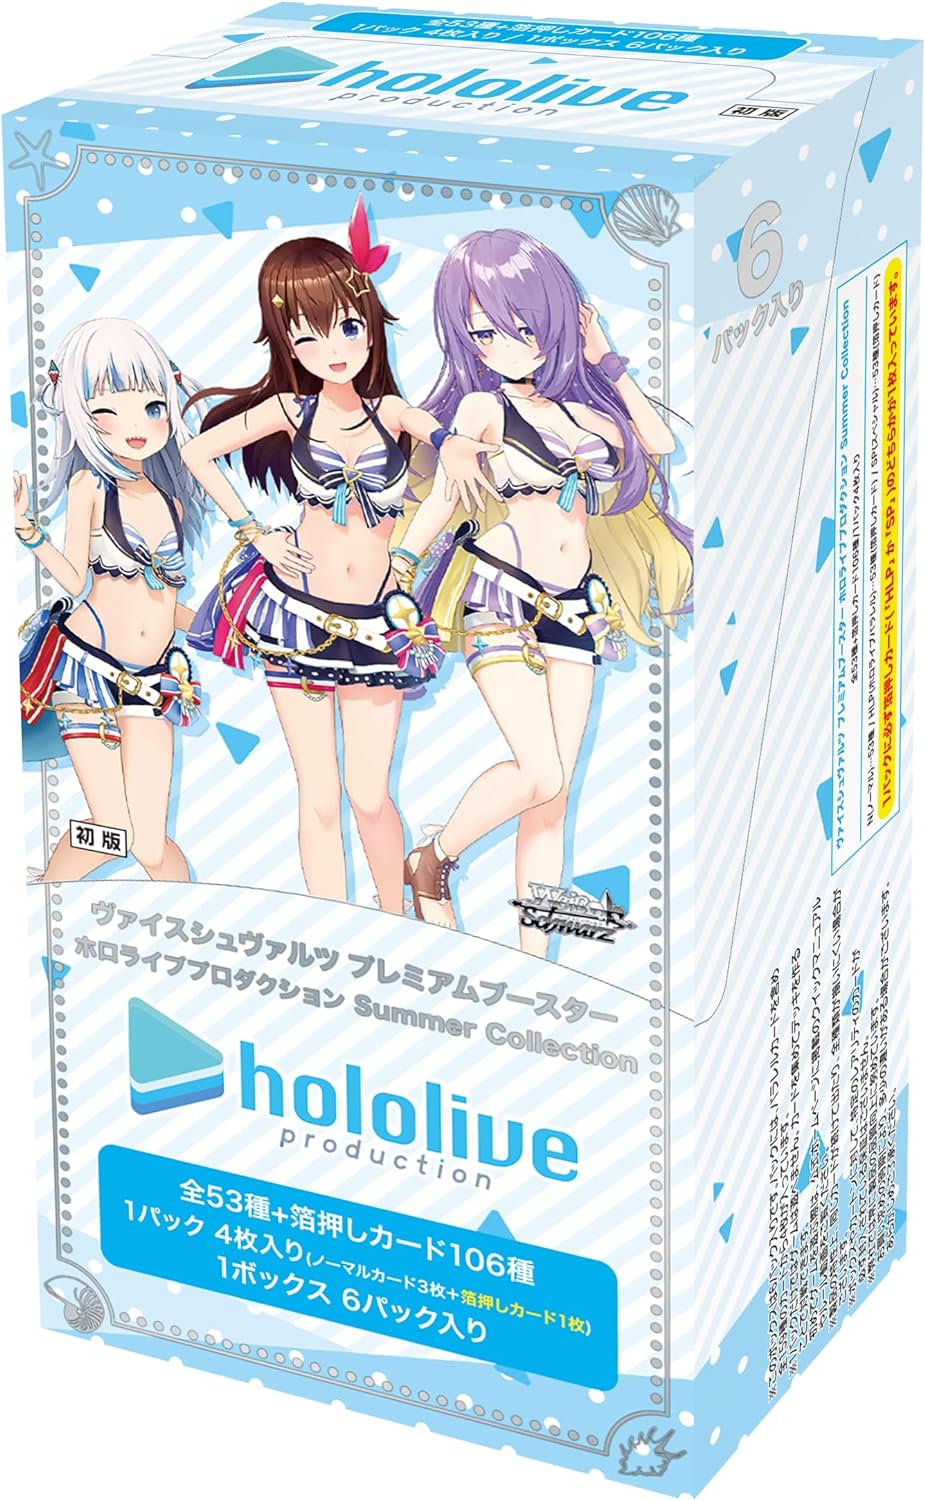 Weiss Schwarz Premium Booster Hololive Production Summer Collection